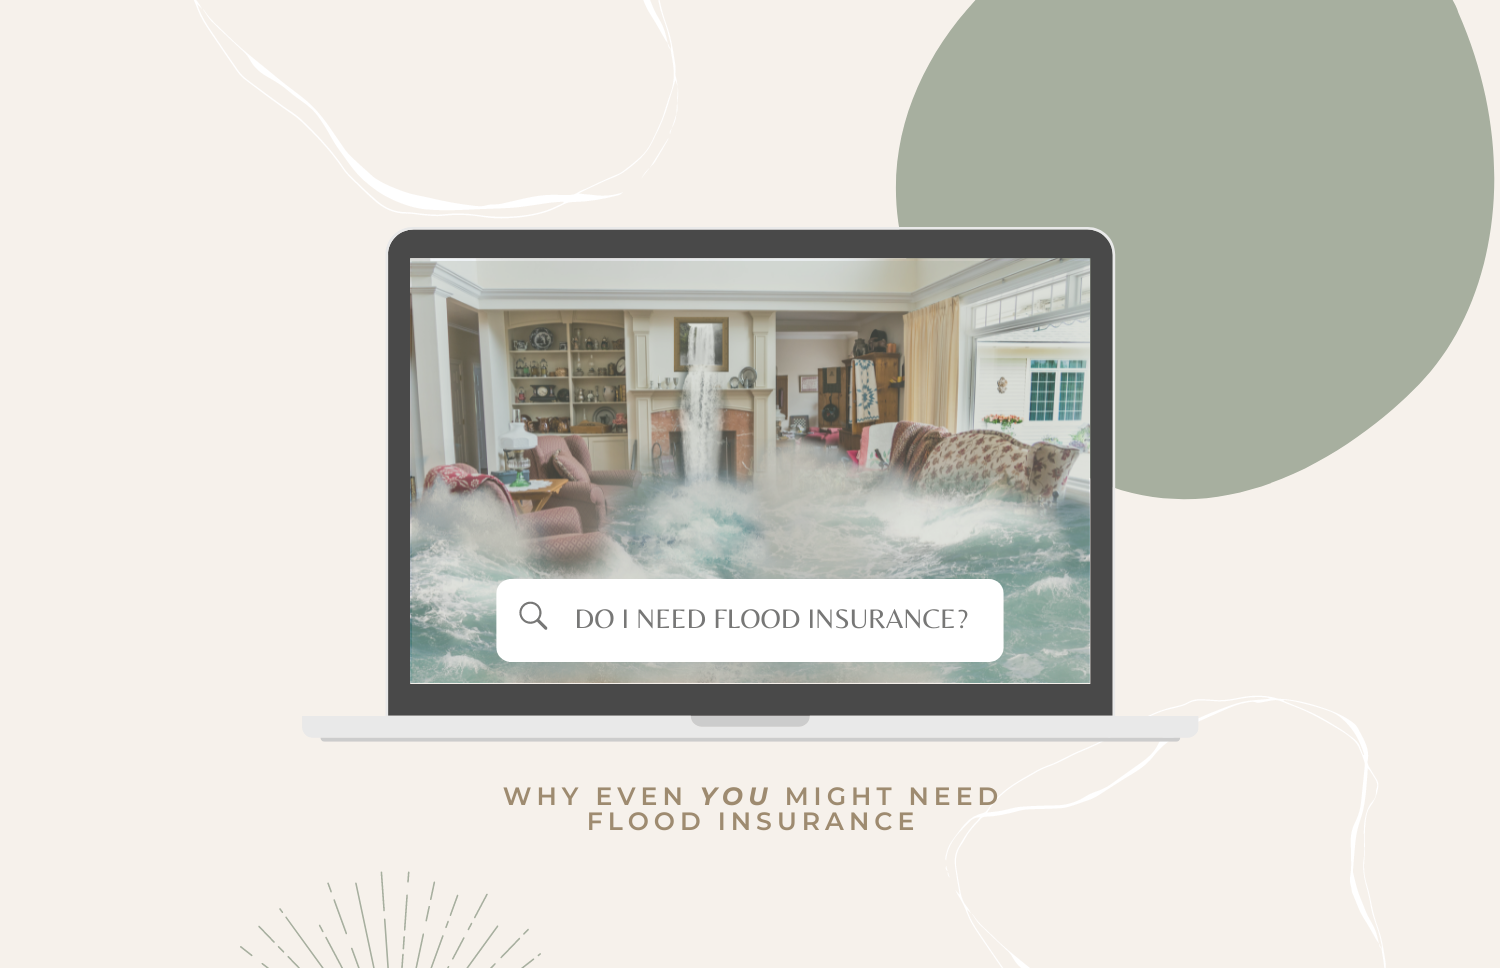 Why Even Your Home May Need Flood Insurance